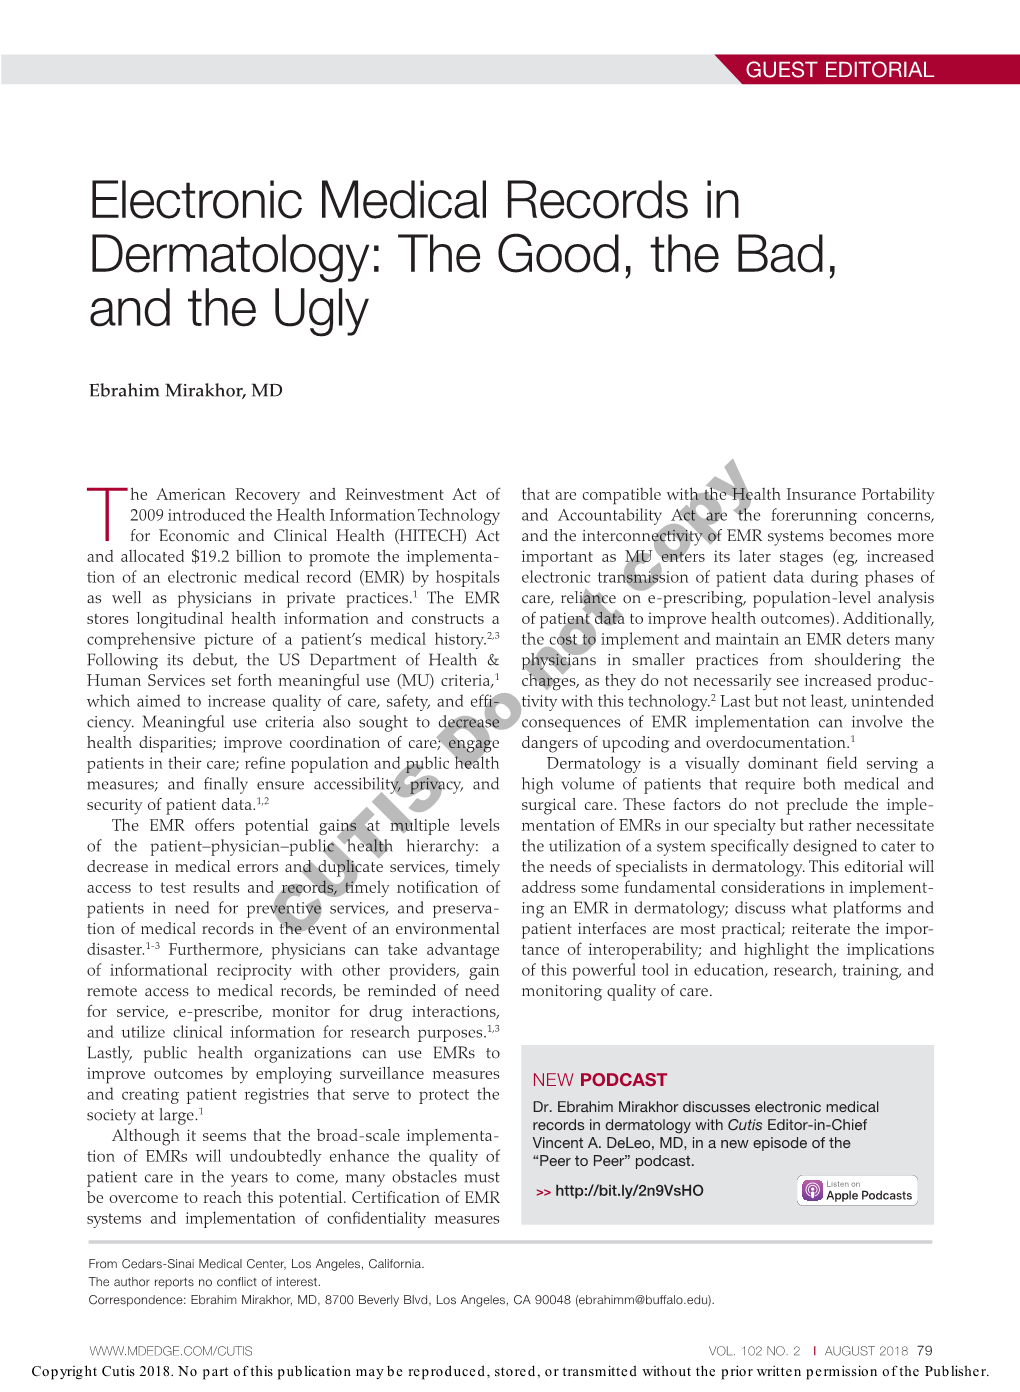 Electronic Medical Records in Dermatology: the Good, the Bad, and the Ugly